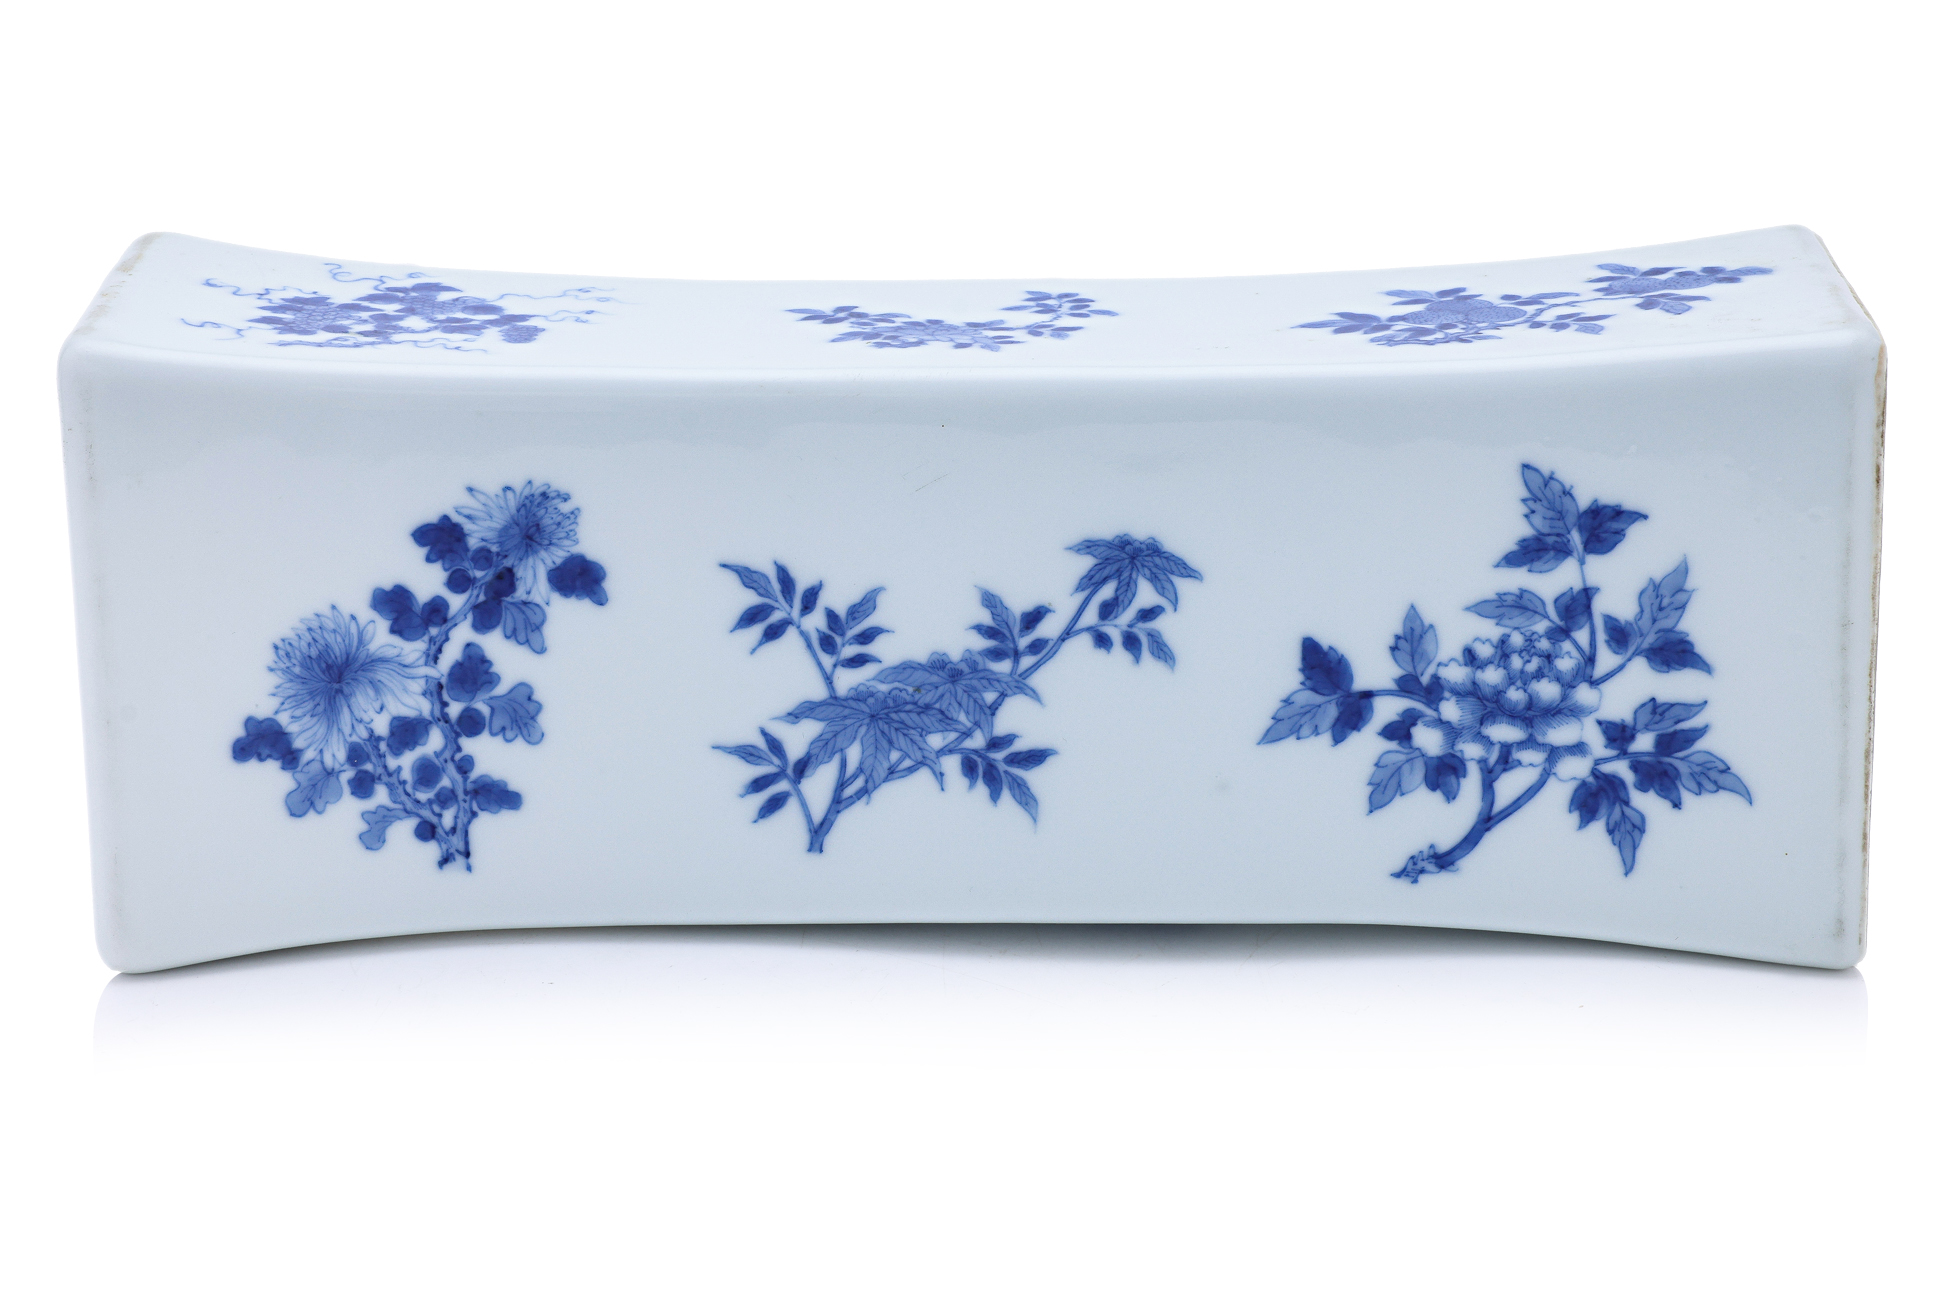 A LARGE BLUE AND WHITE PORCELAIN PILLOW